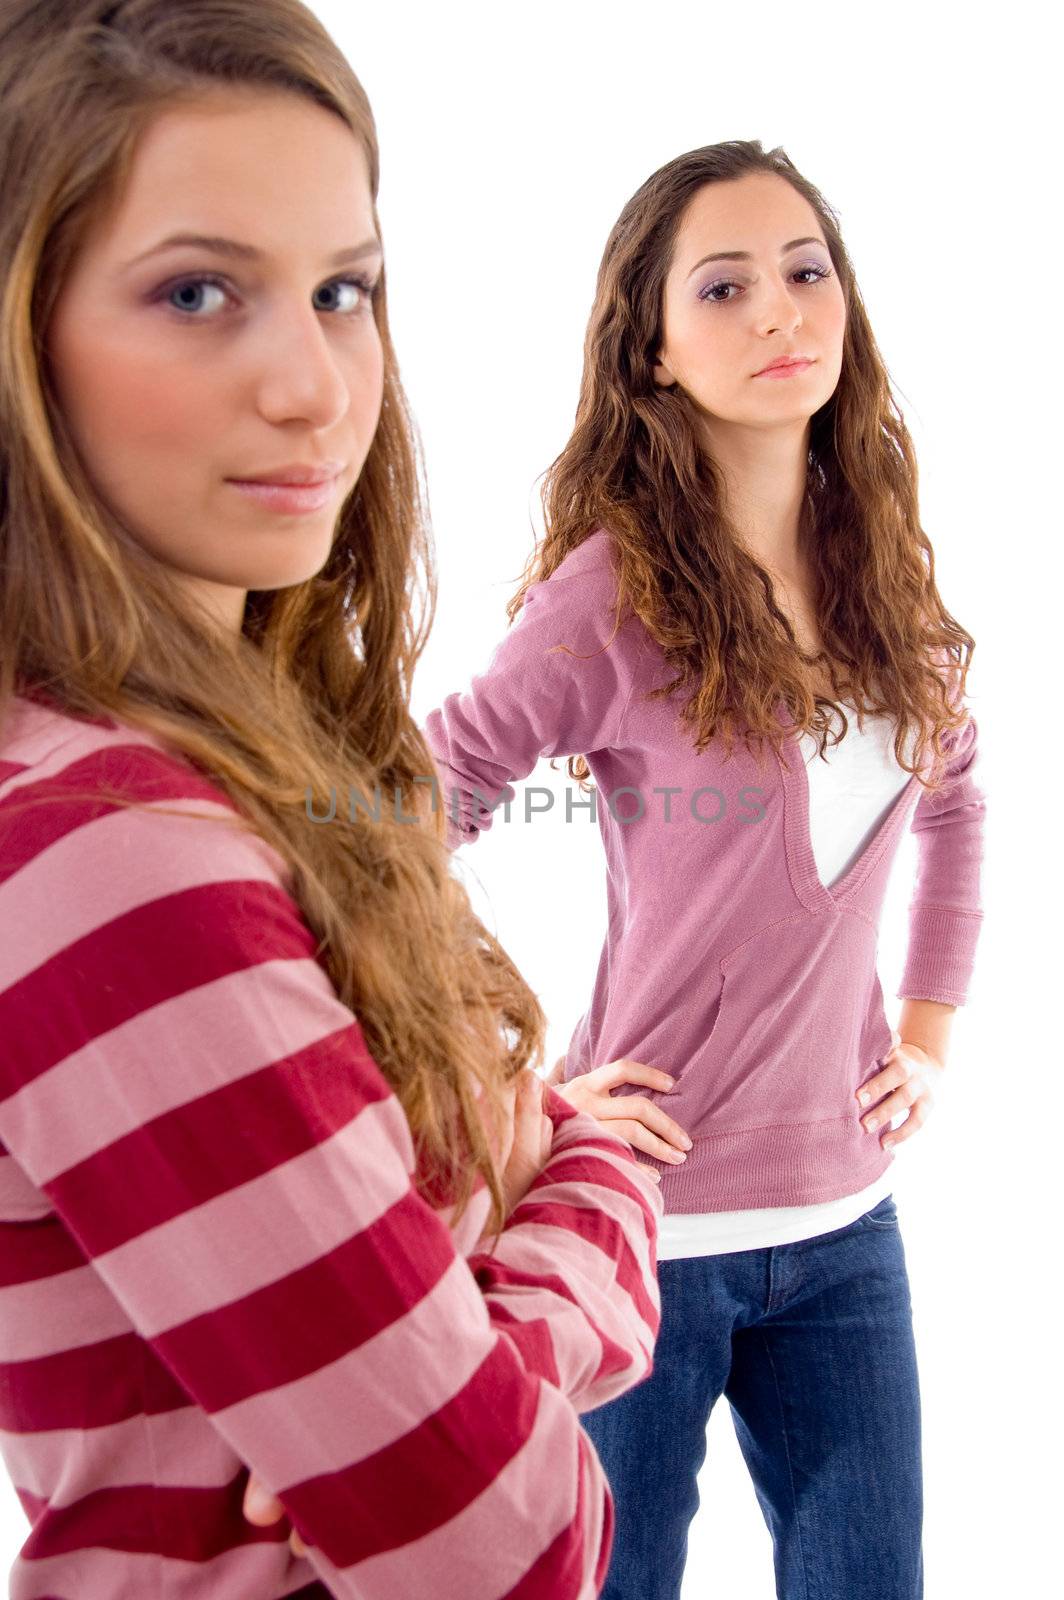 young two friends standing together with white background